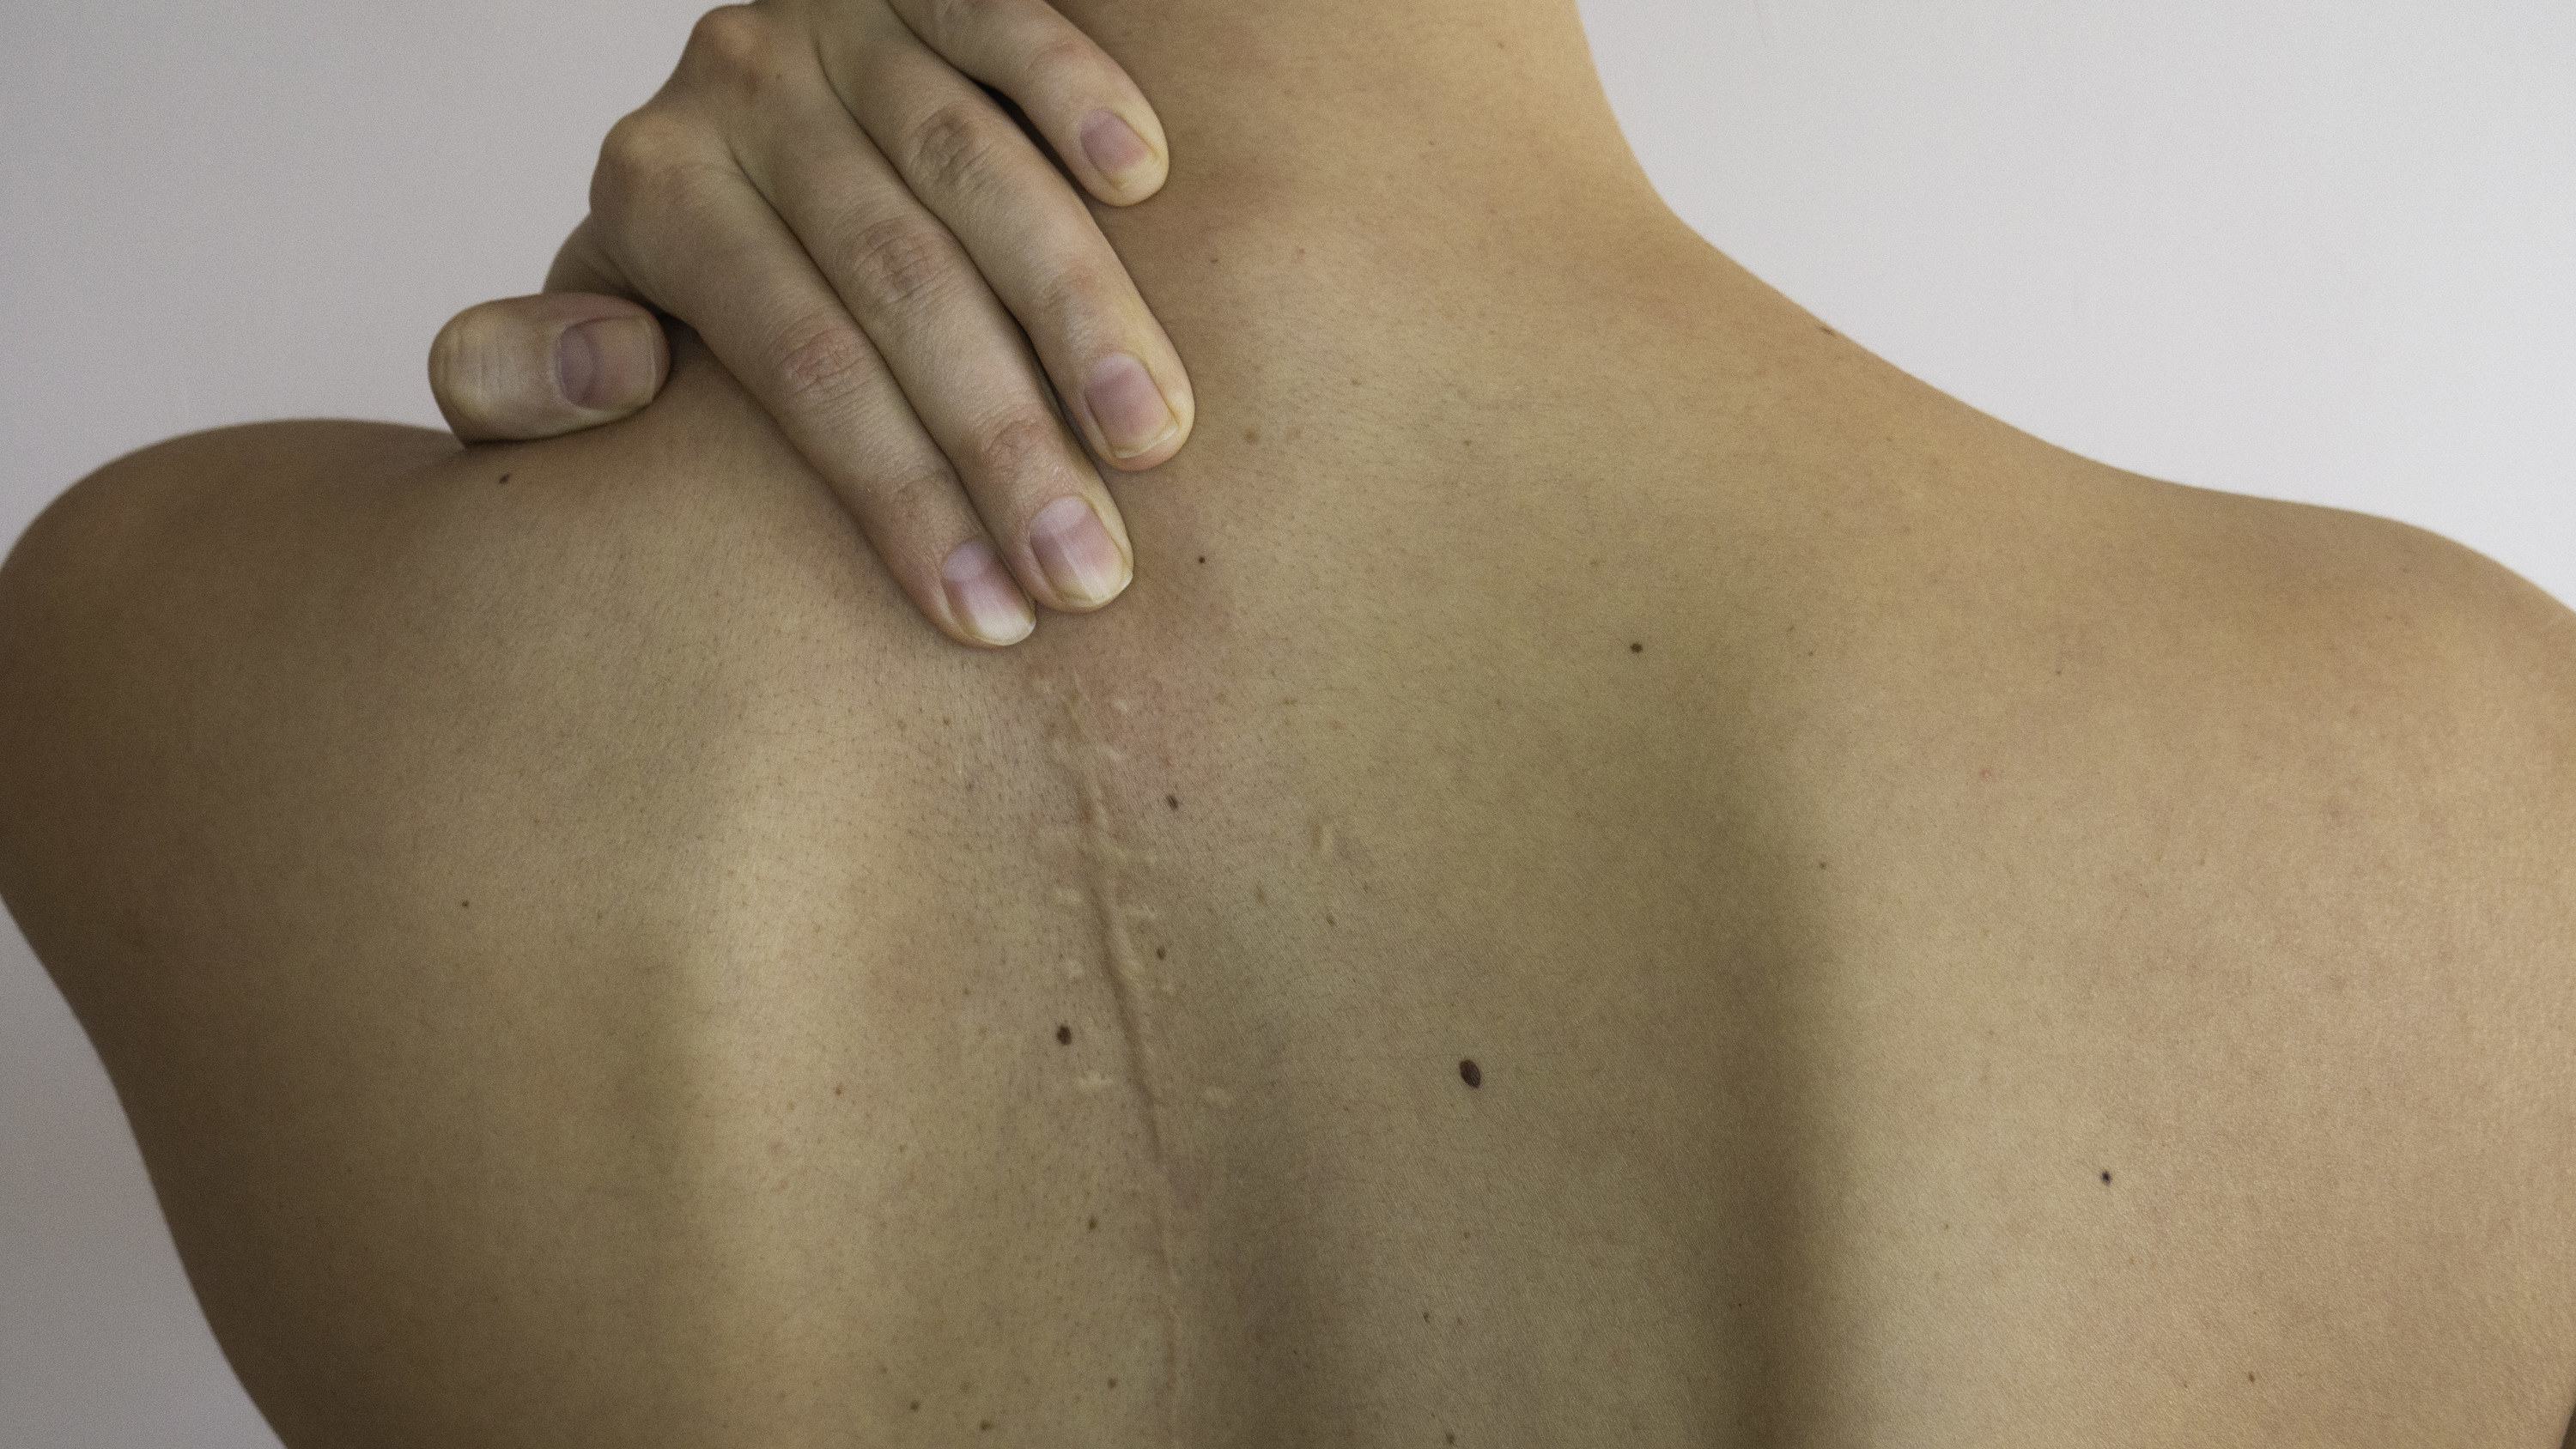 a person with a scar on their back